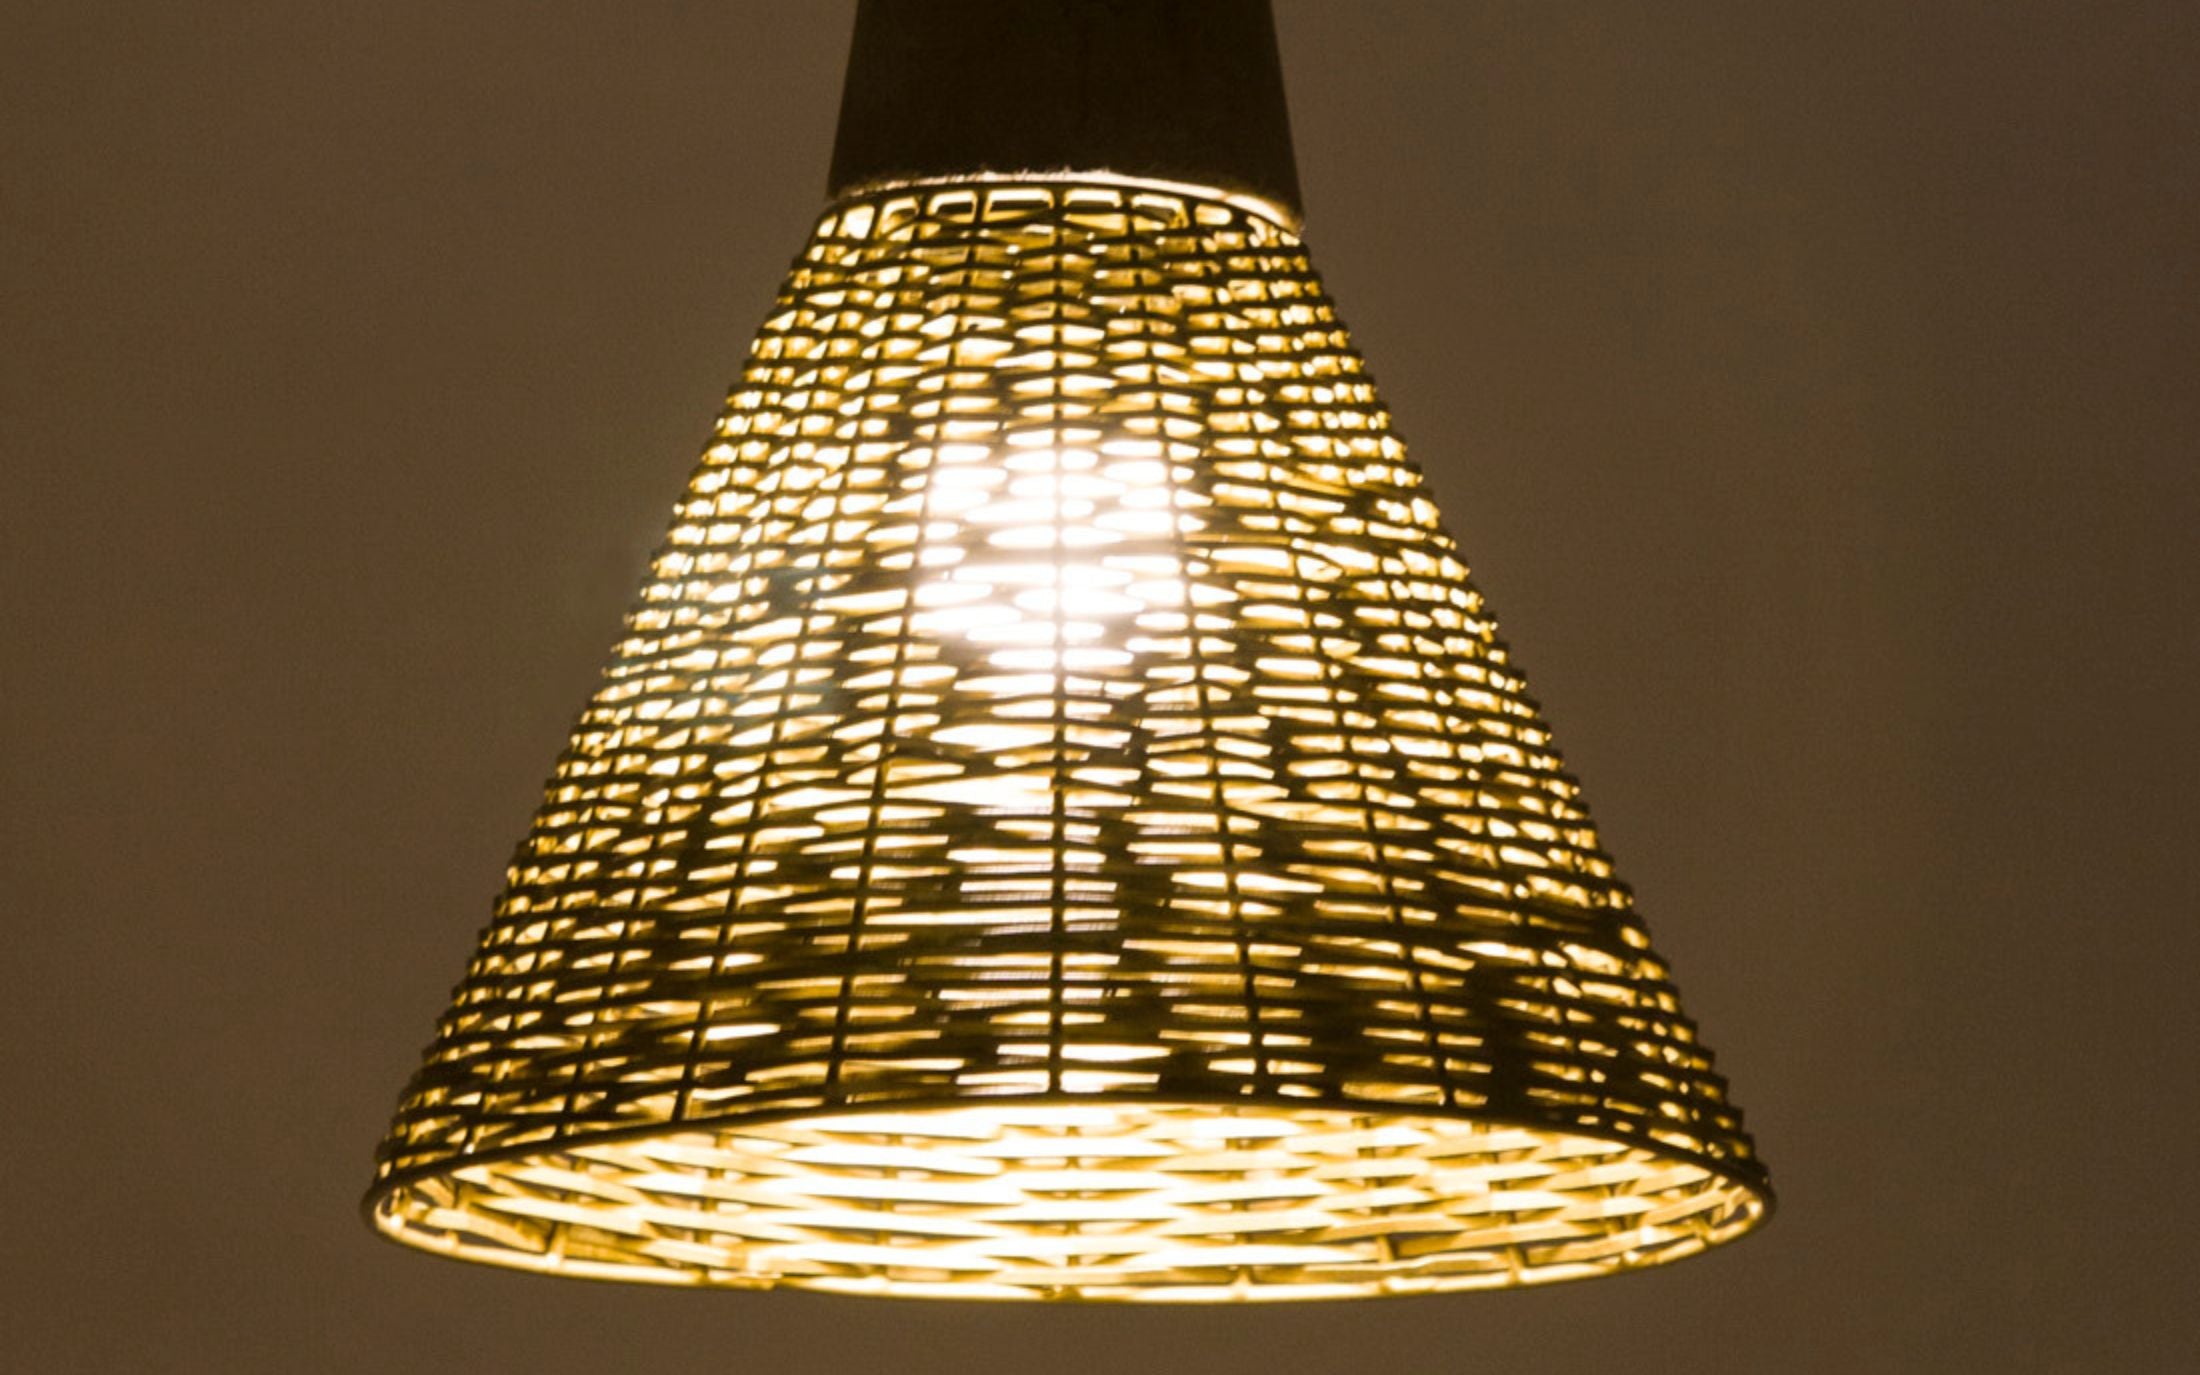 CageÃ‚Â Conical Hanging Lamp